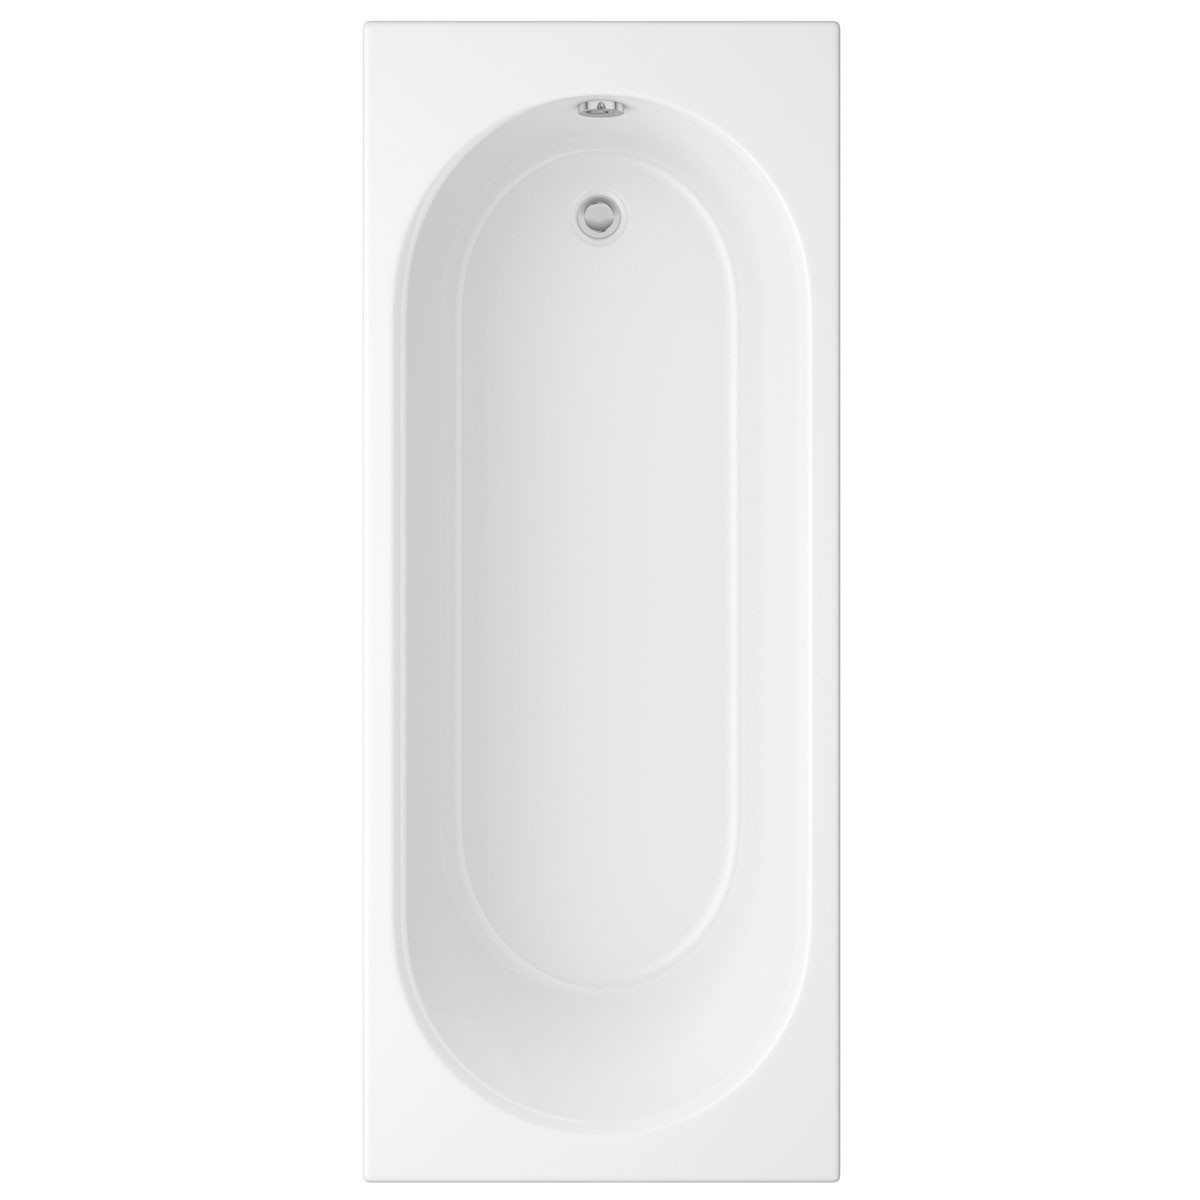 CANALETTO TROJANCAST 1800 X 800MM SINGLE ENDED BATH